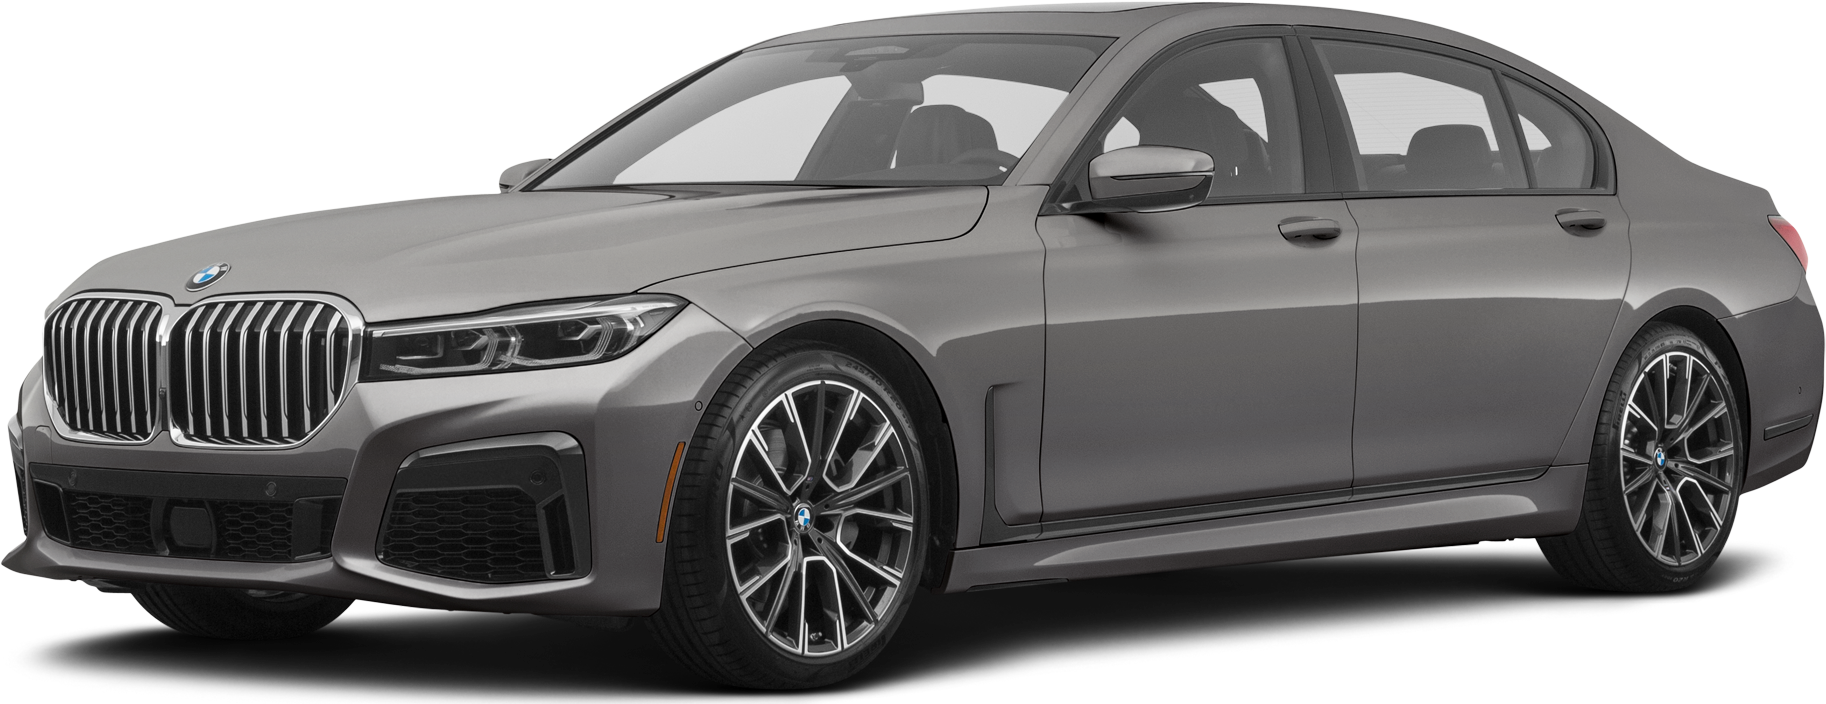 New 2022 Bmw 7 Series Reviews Pricing And Specs Kelley Blue Book 